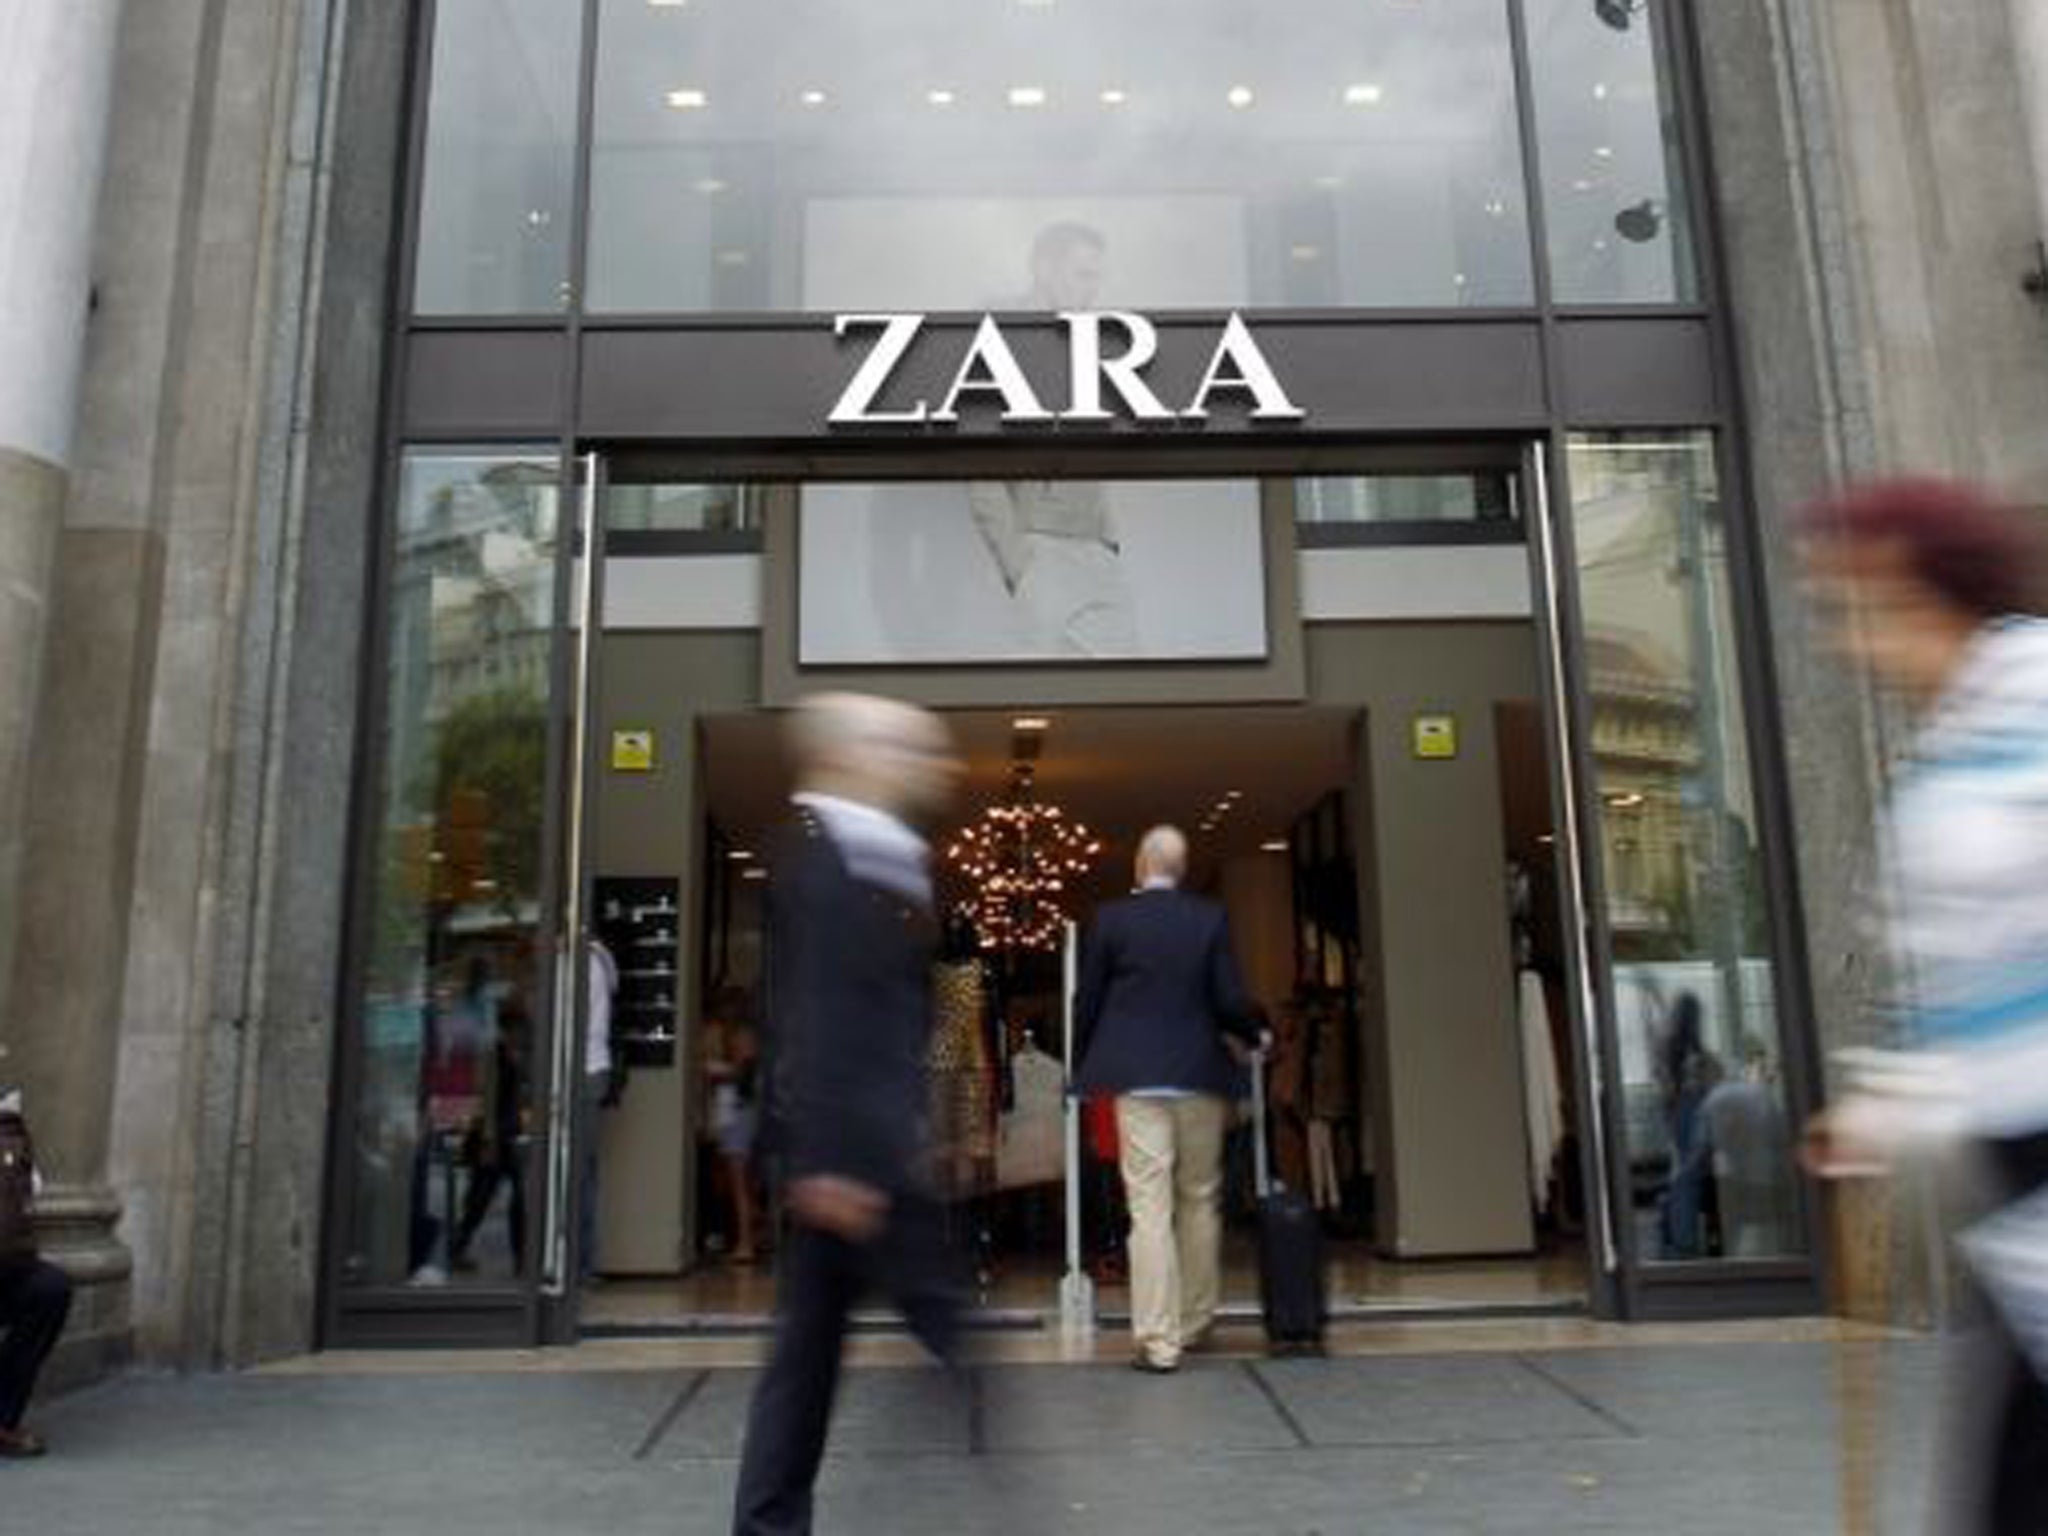 That Zara has been chosen the most popular shop on the high street by British women is not much of a surprise